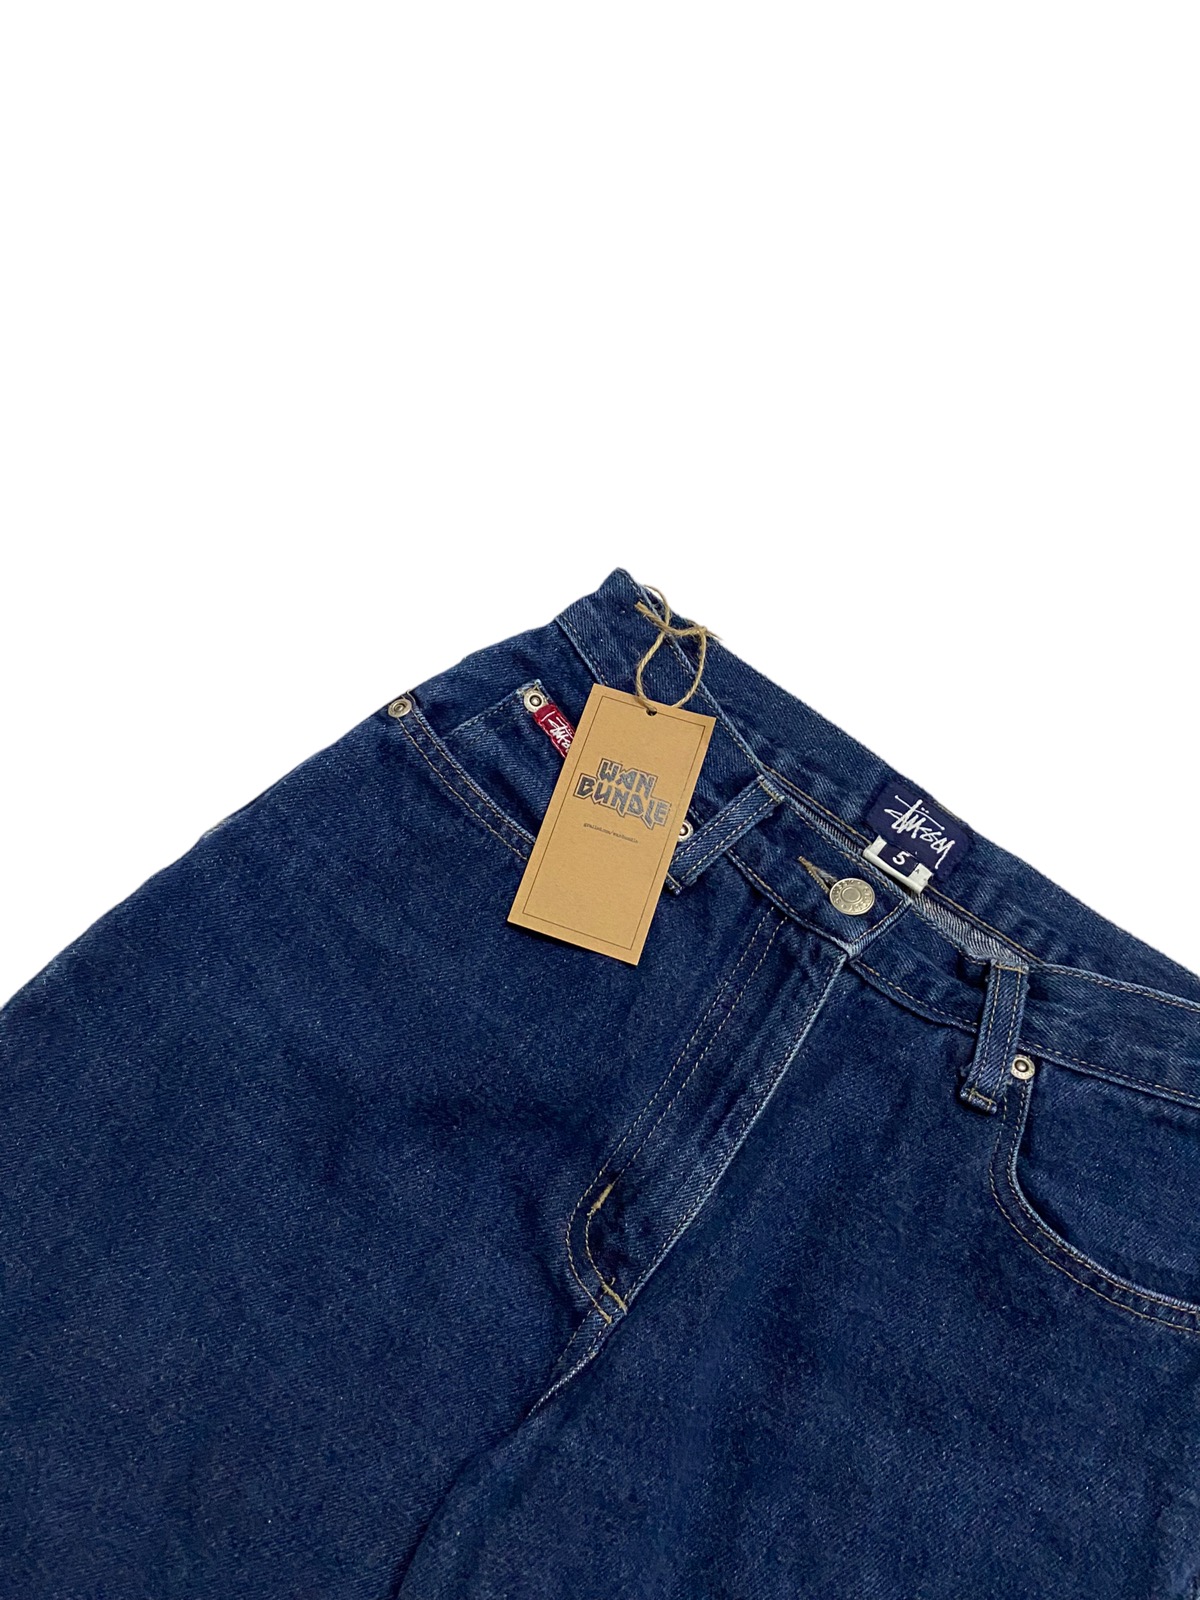 Vintage Stussy Short Jeans Made in USA - 4